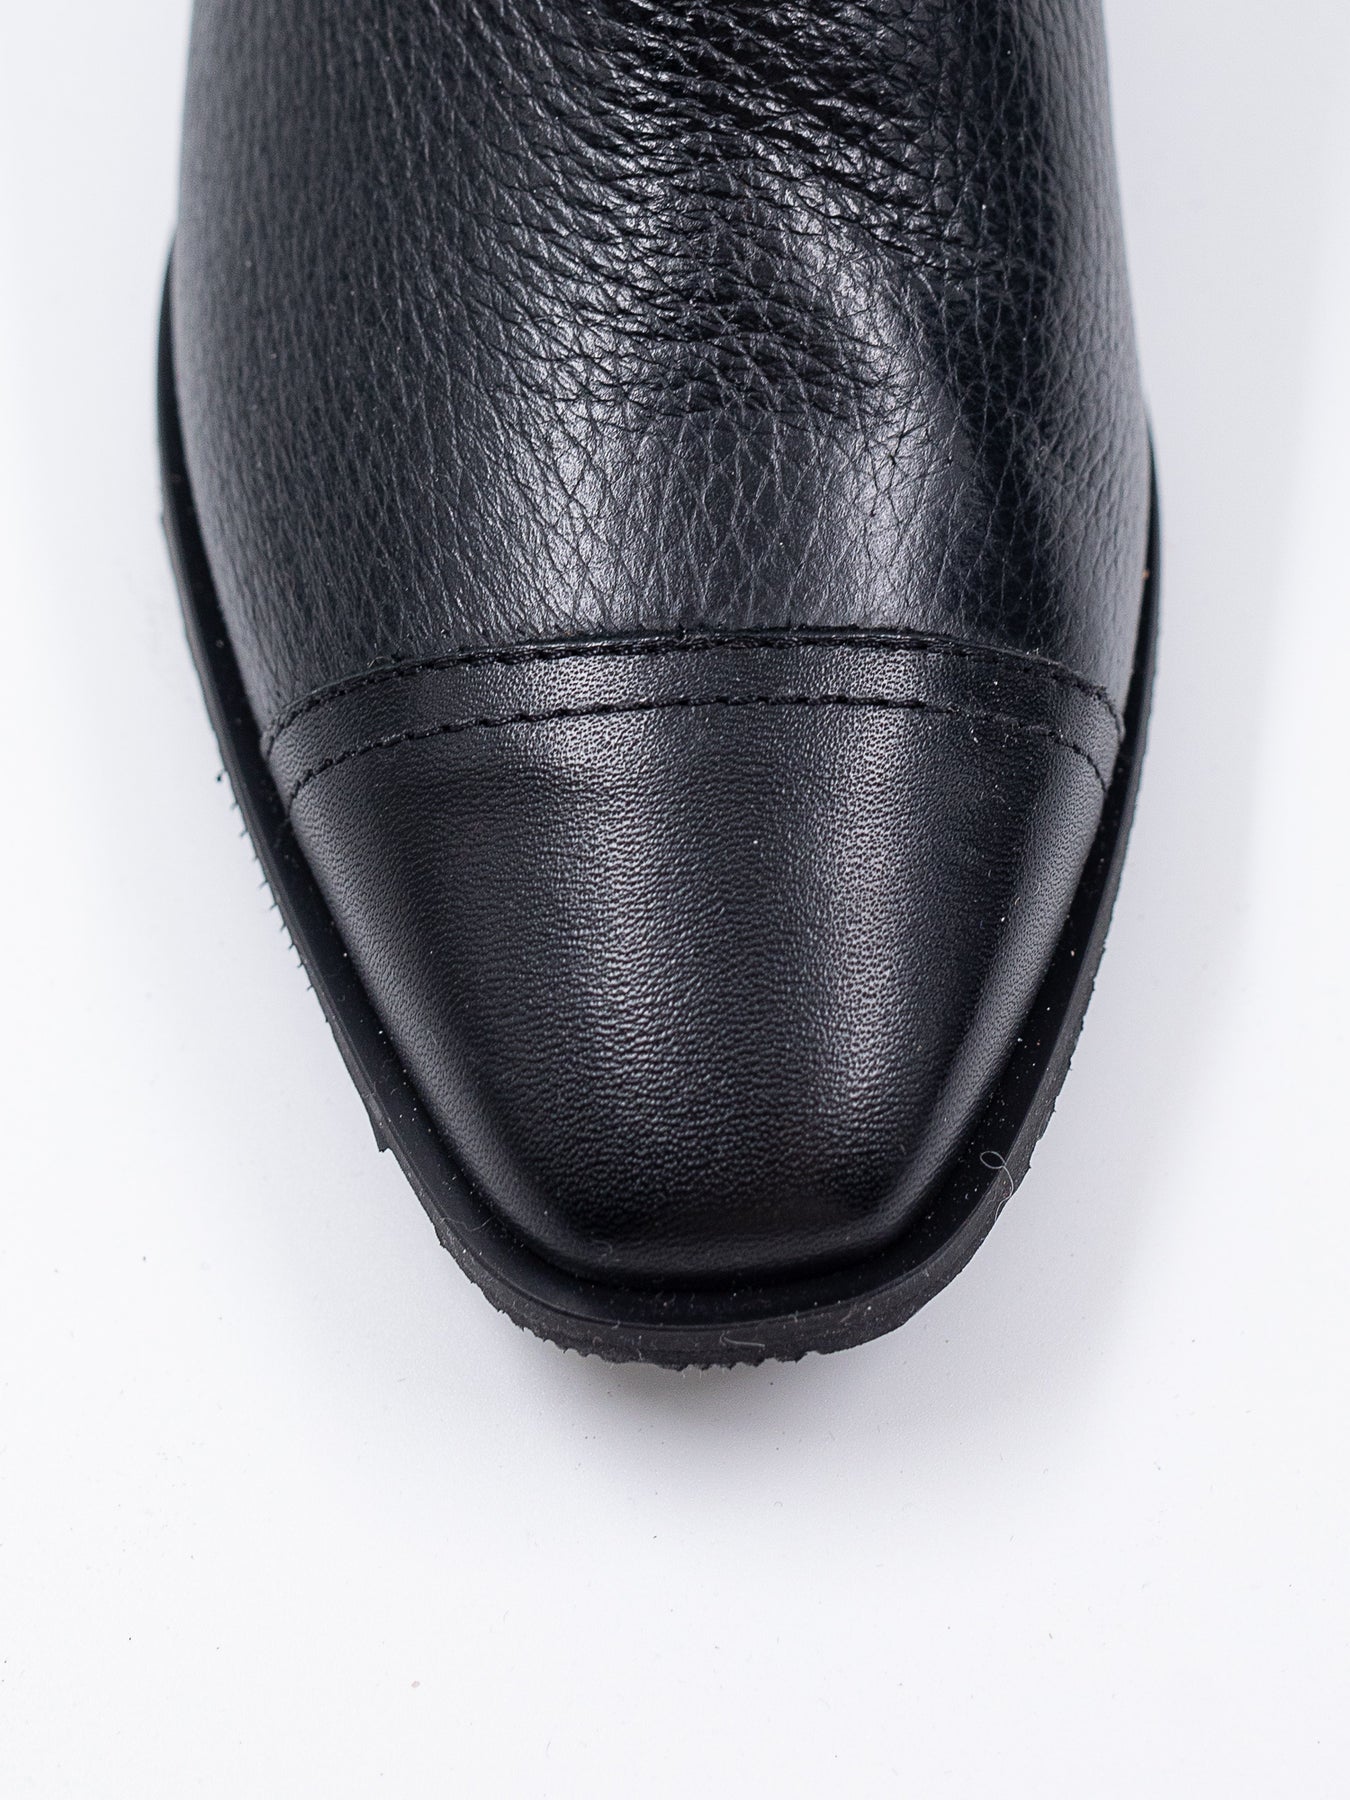 Blankens - Affordable luxury, sustainable style. Shoes made in Europe.